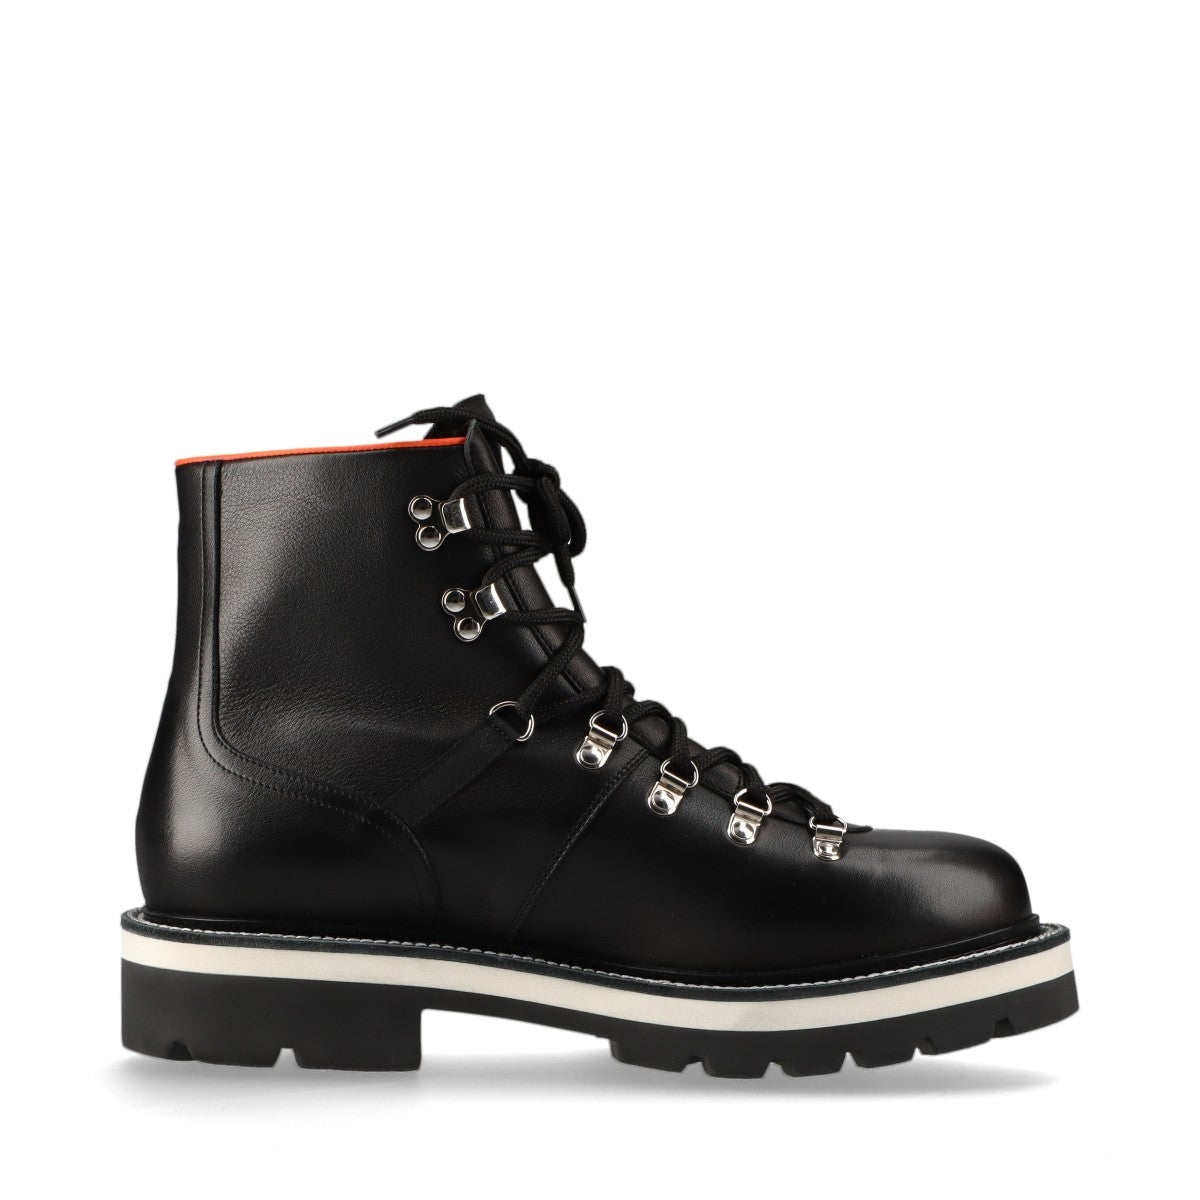 Hermès Leather Short Boots EU42 1/2 Men's Black HYKE Replacement string Box There is a bag